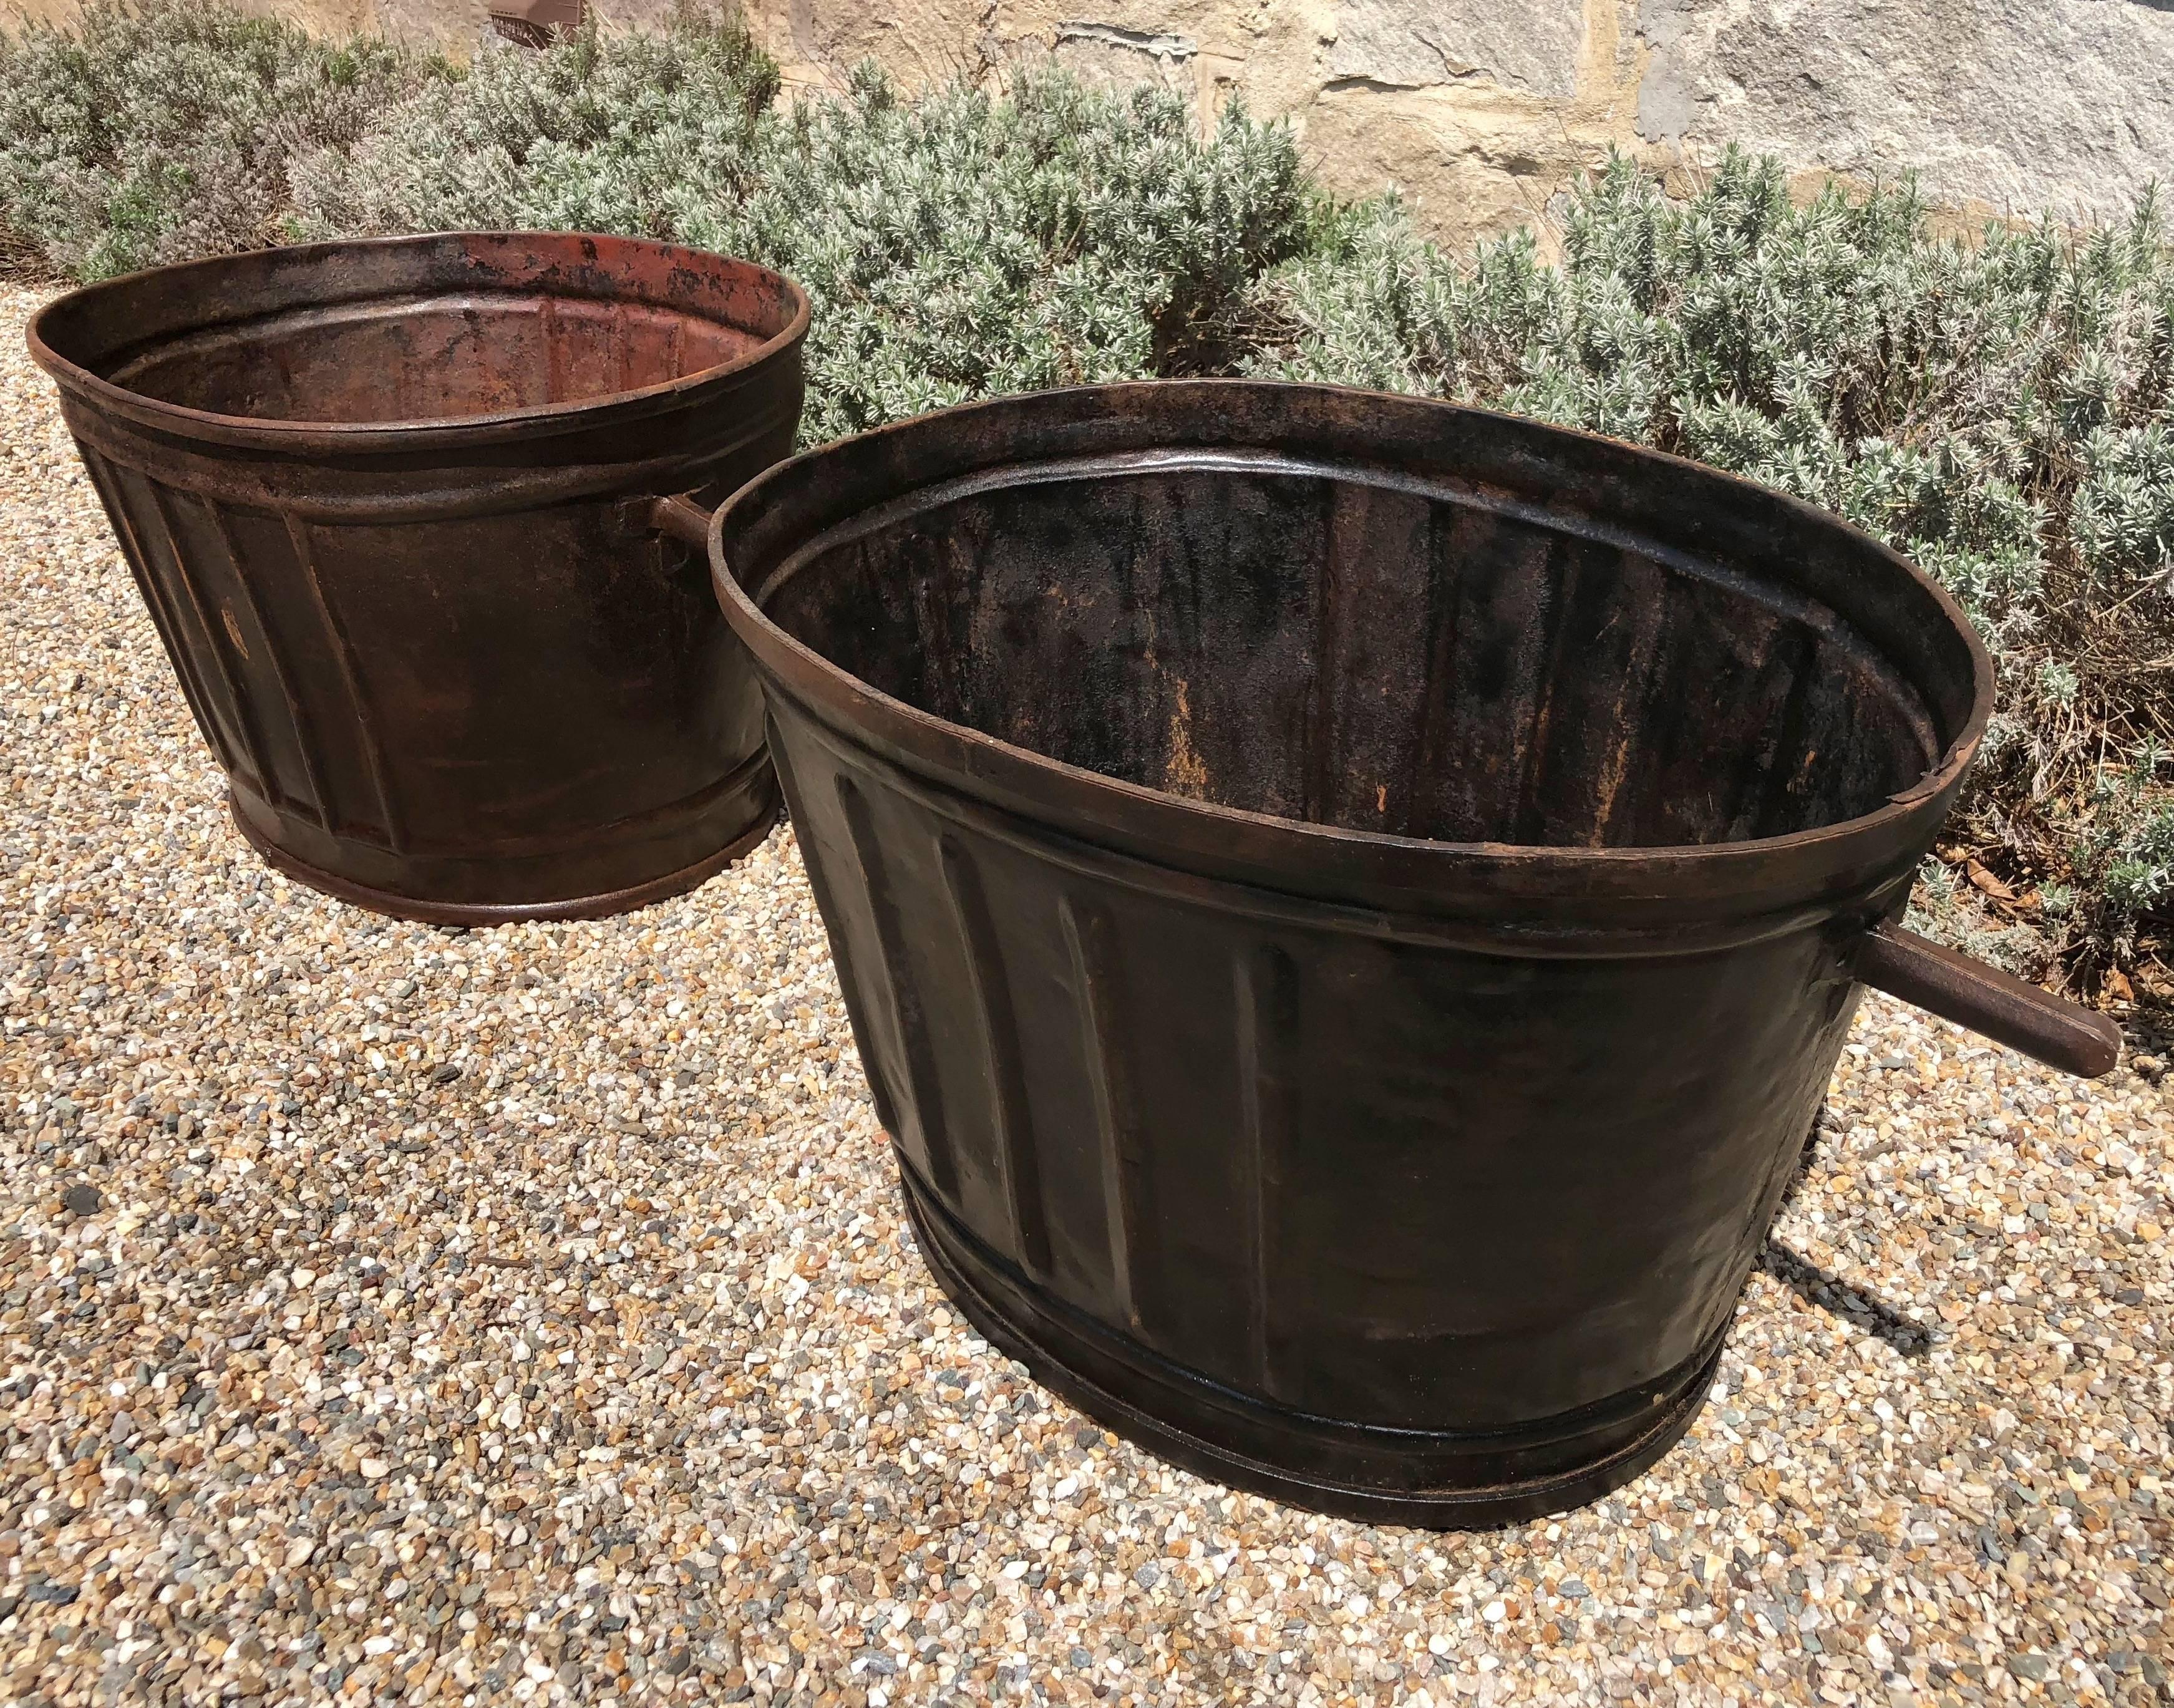 This pair of steel wine-harvest buckets has been burnished to a stunning patina and would make wonderful planters or accessories in your wine cellar. From Burgundy, they both have a beautiful raised ribbed design on the exterior and are totally